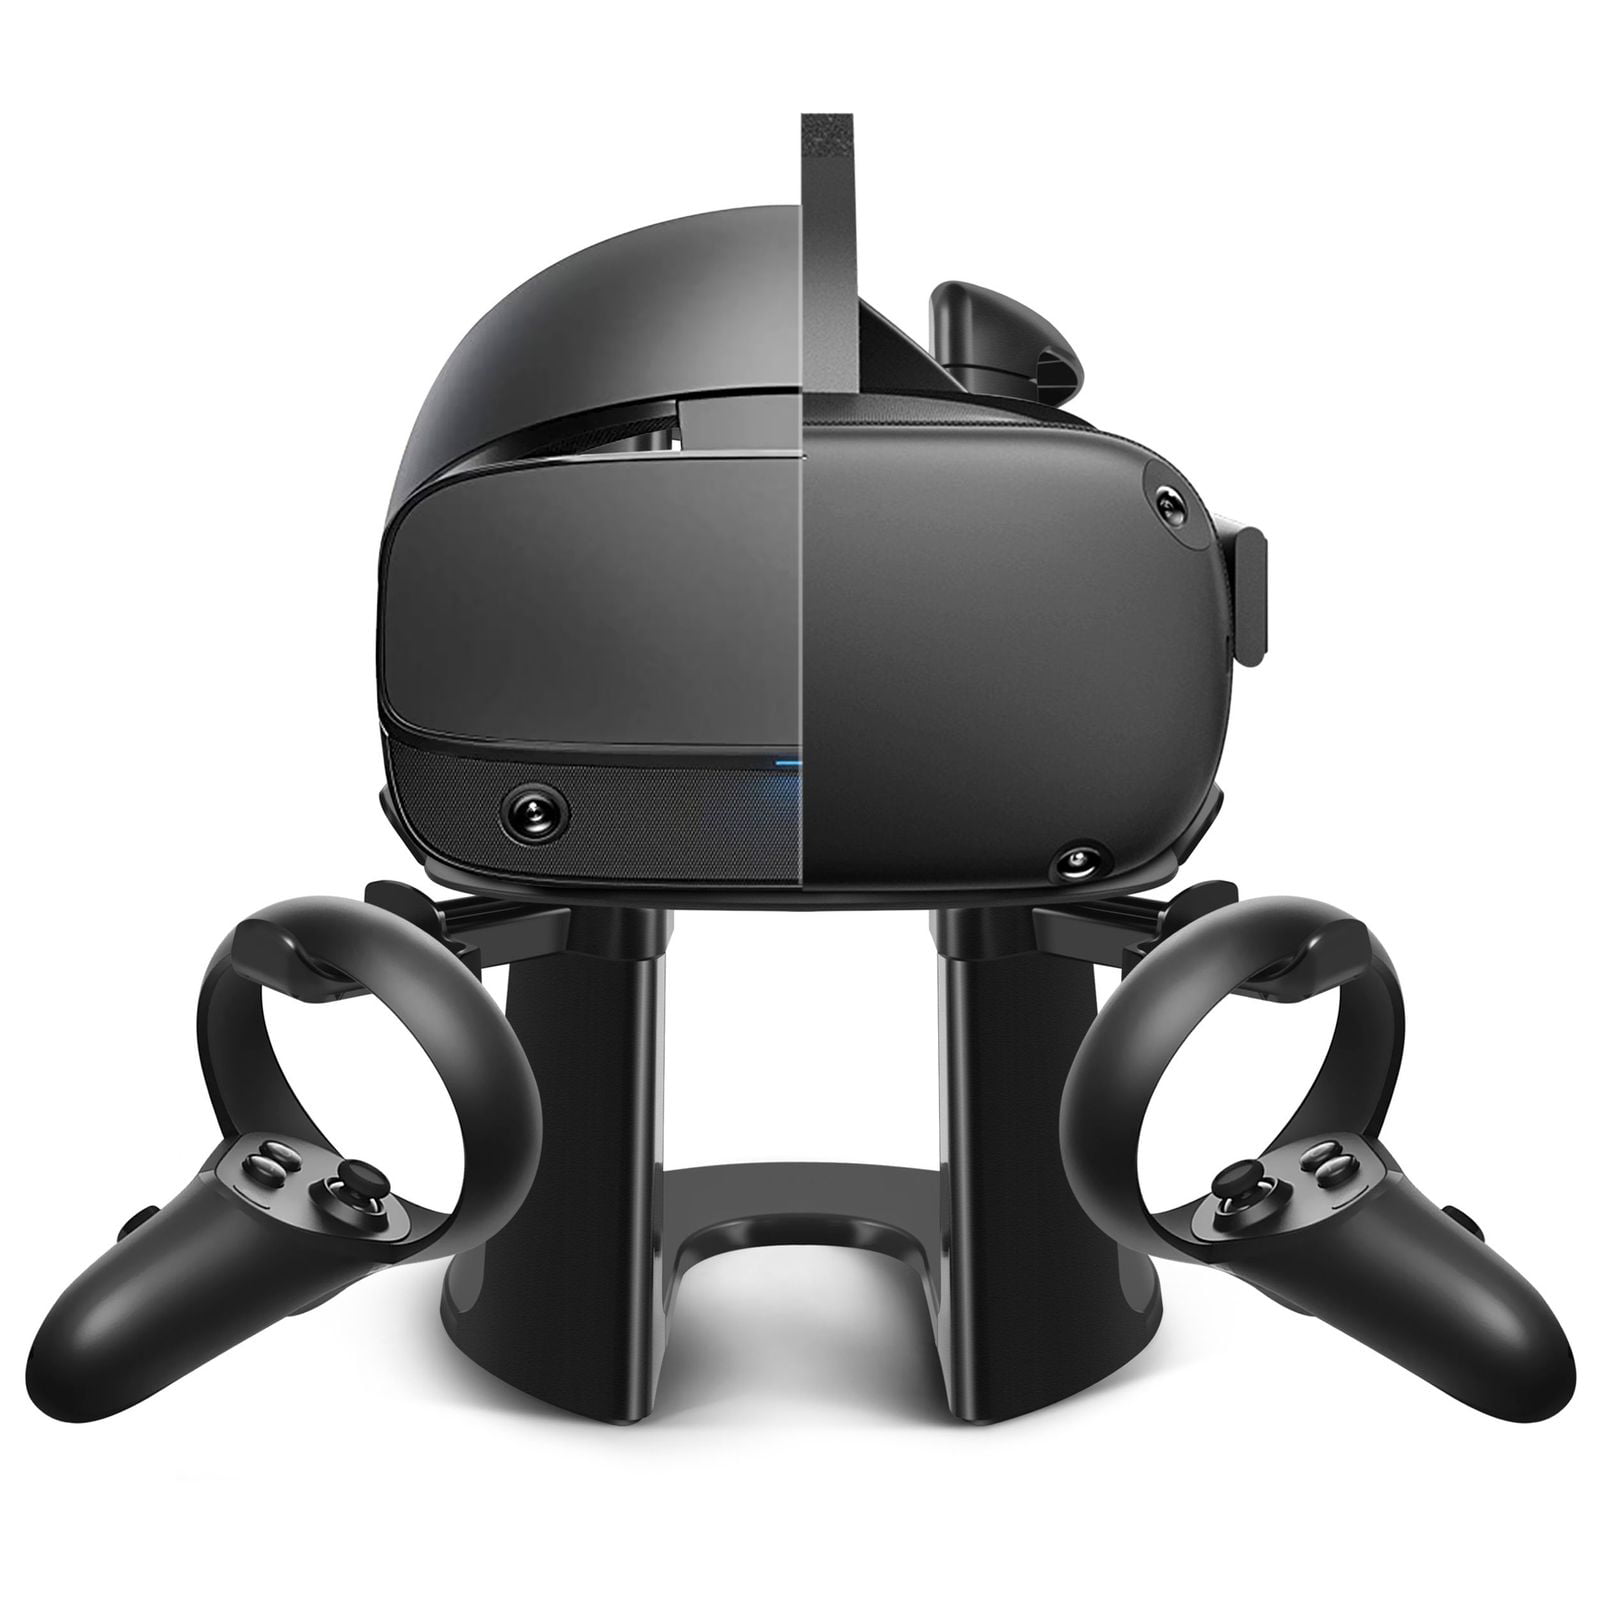 VR Stand Headset Display Holder and Controller Mount Station for